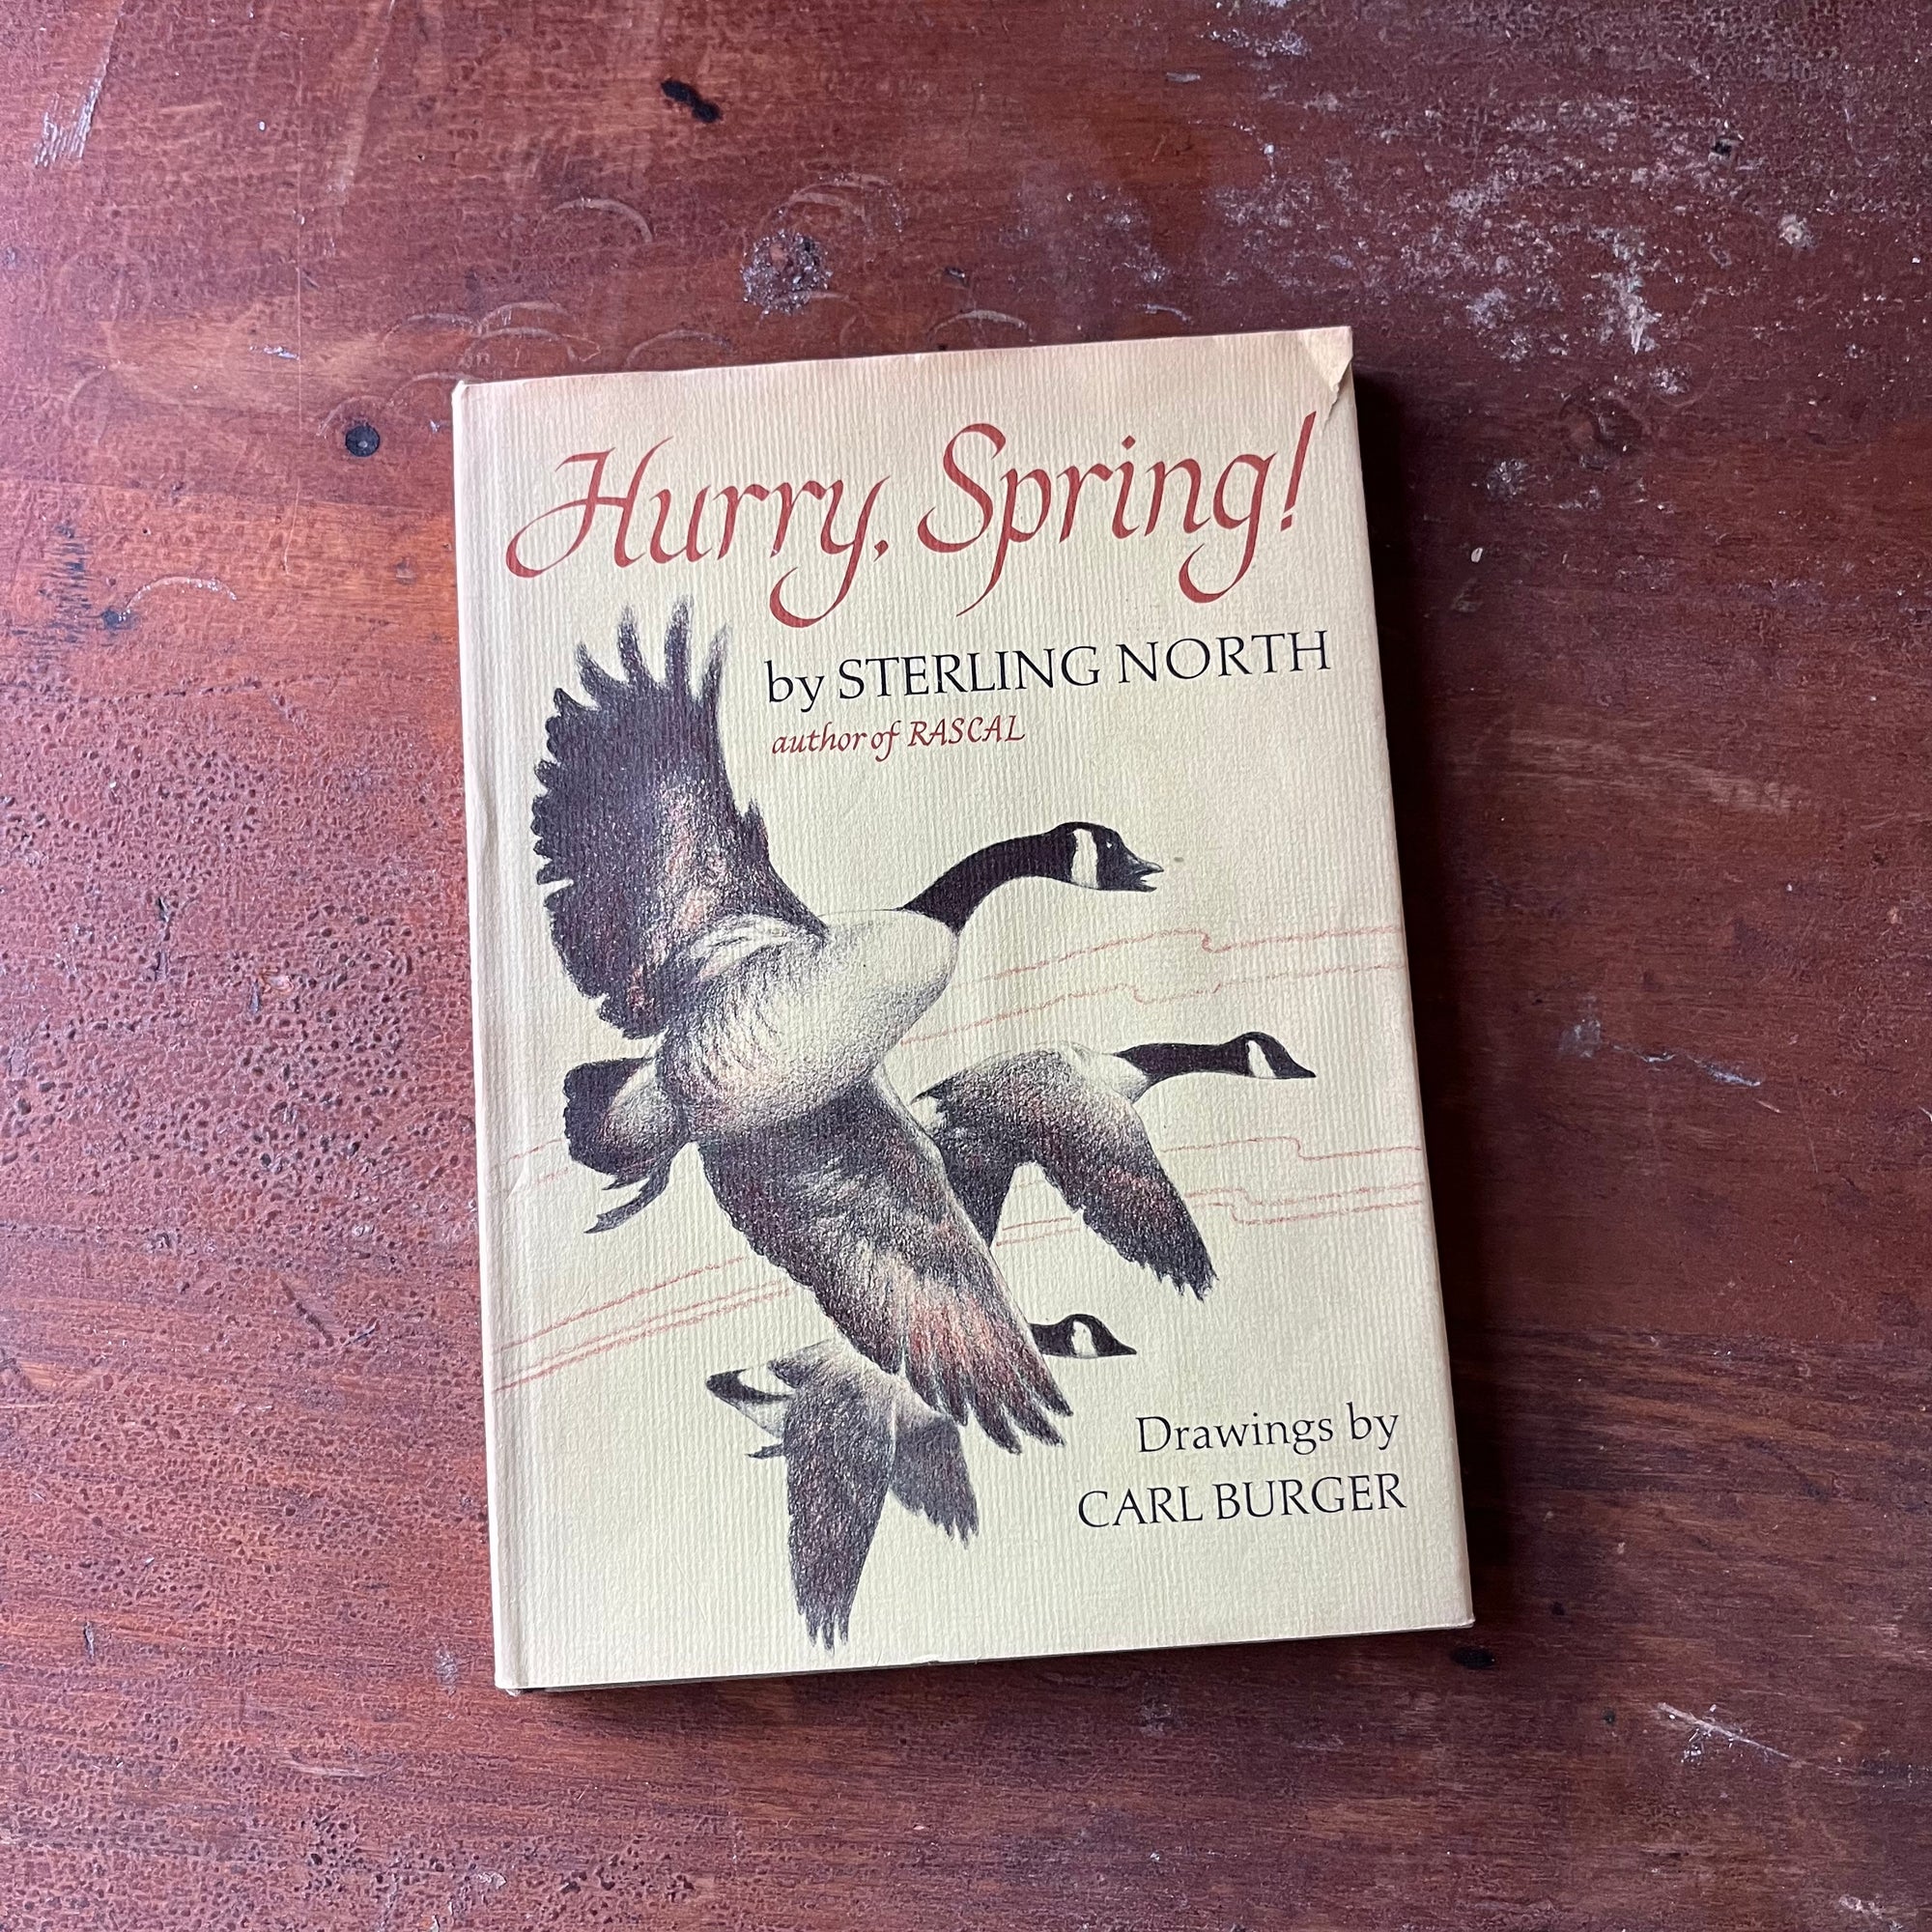 Hurry, Spring! by Sterling North-Illustrated by Carl Burger-vintage children's book about nature-view of the dust jacket's front cover with flying geese along with the title, author  & illustrator listed